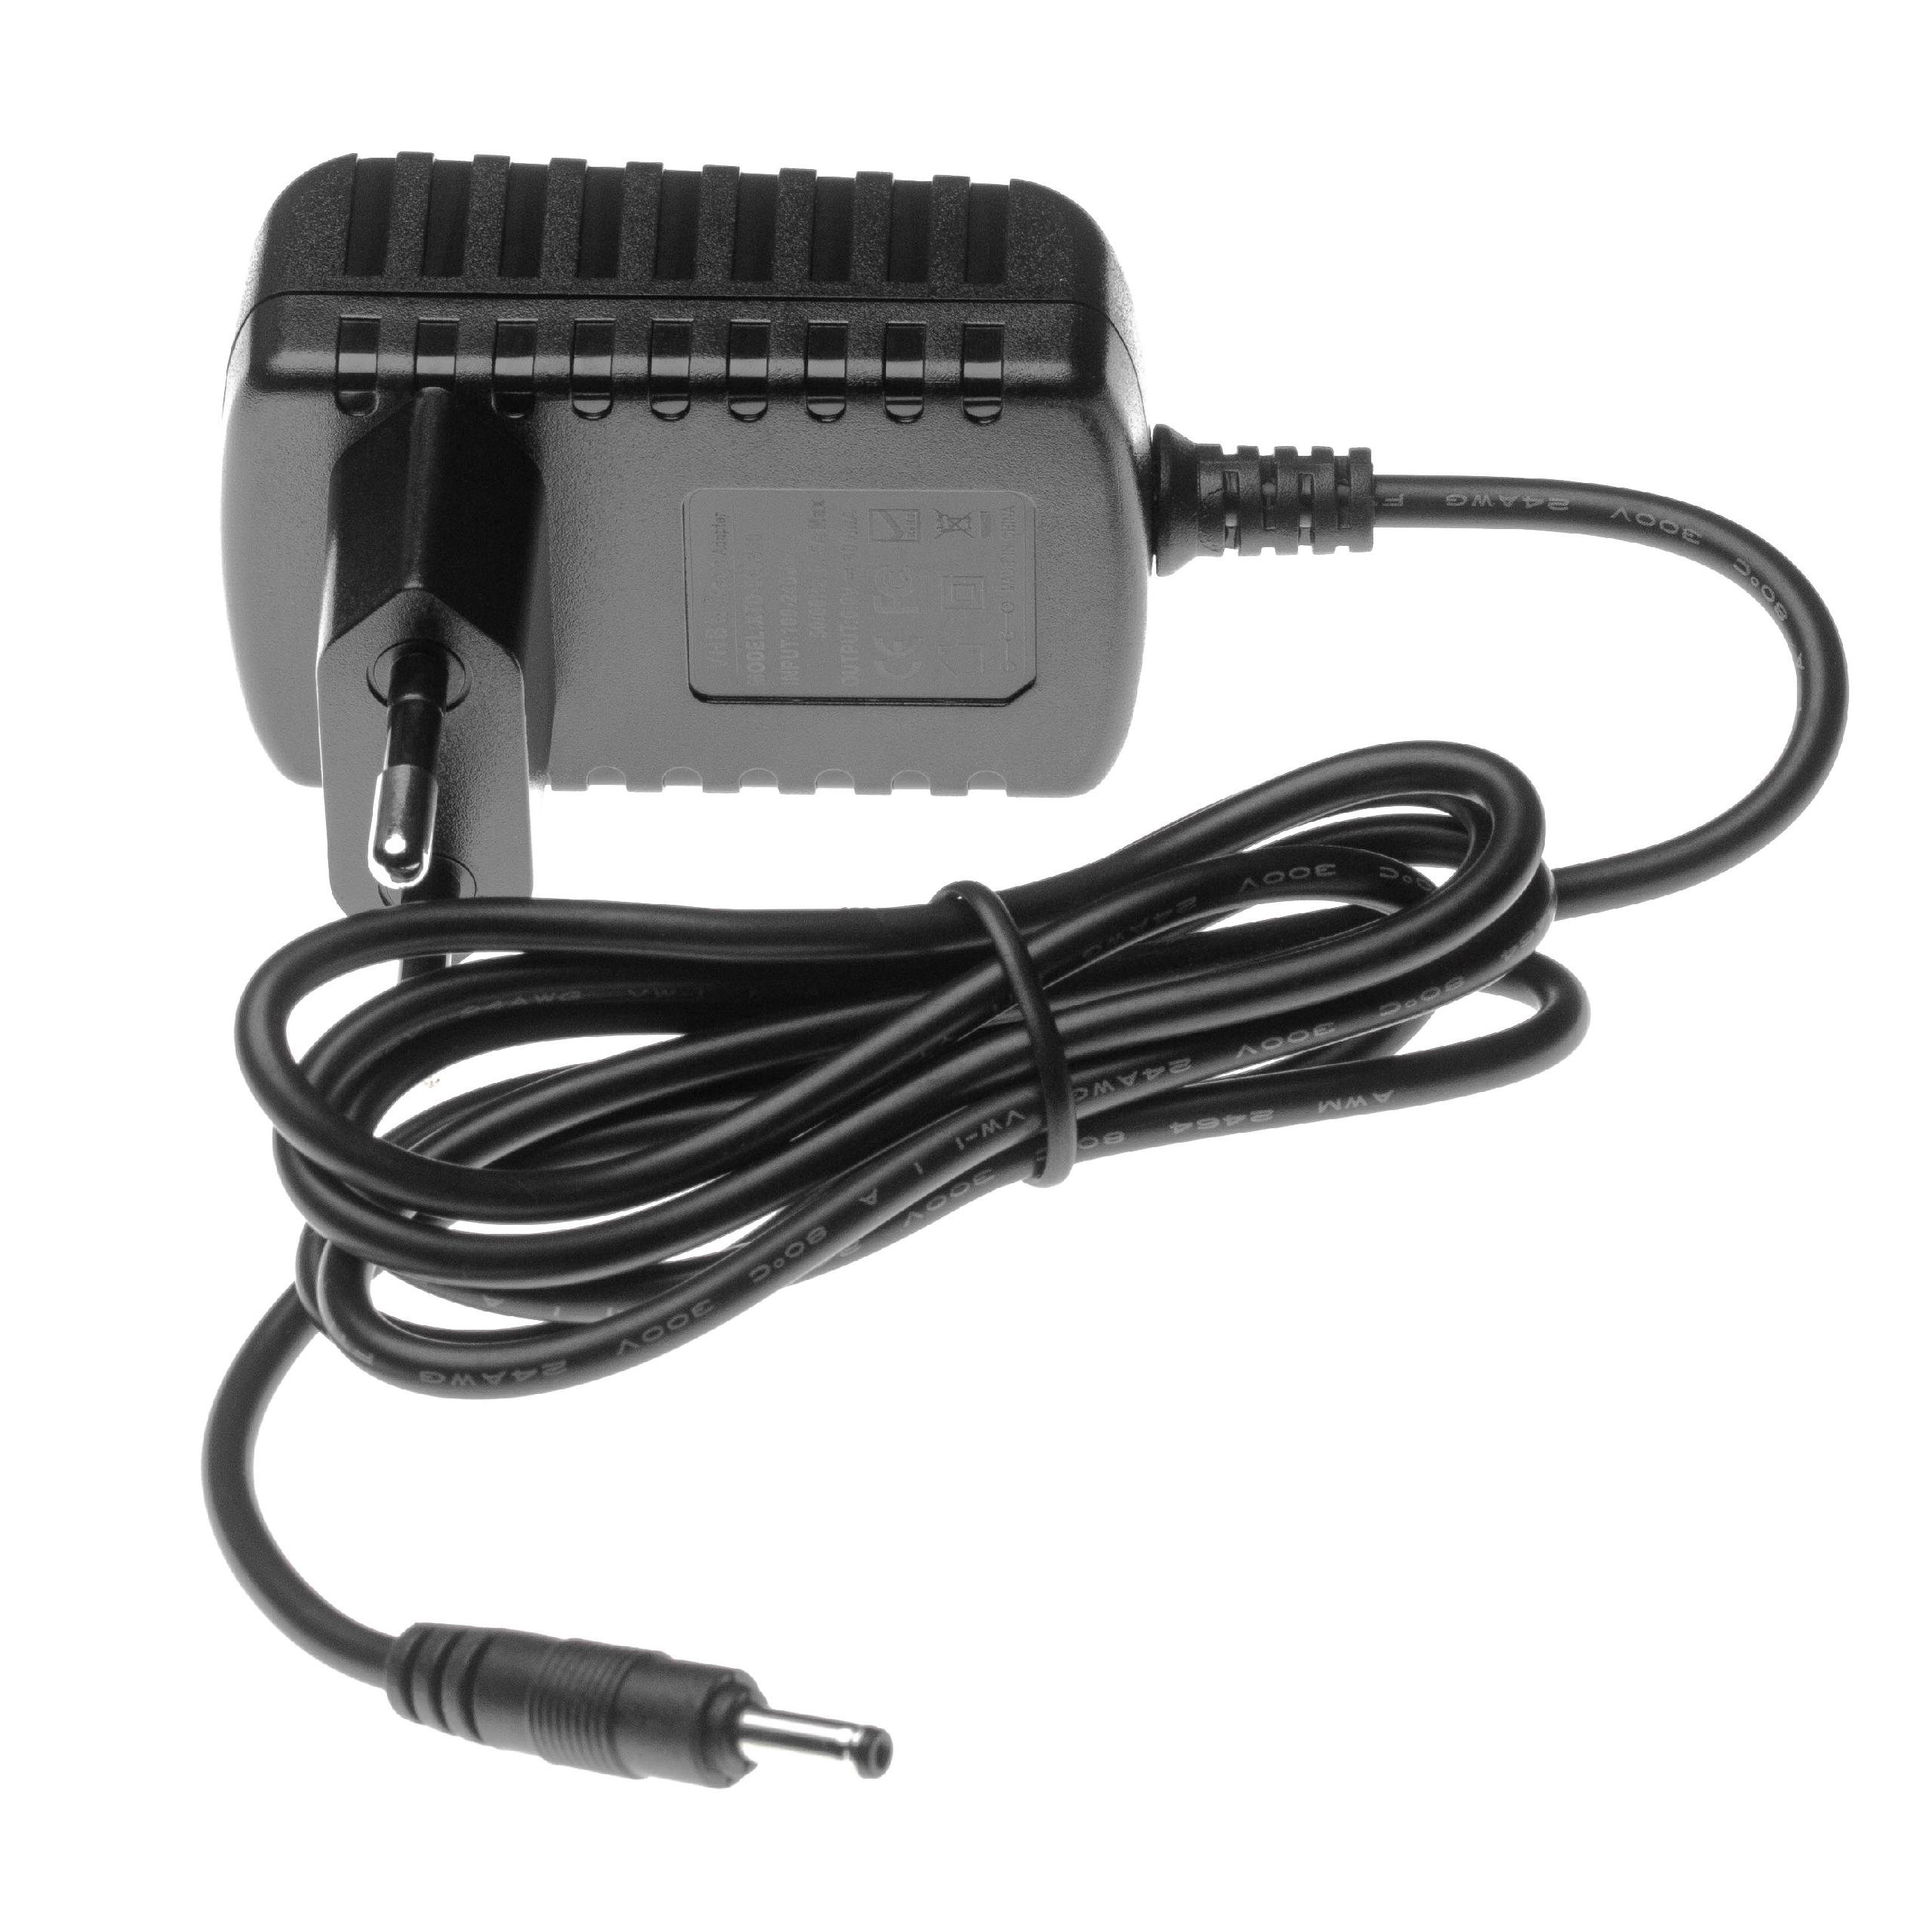 Mains Power Adapter replaces Jabra ACGN-22T for Jabra Headset, Earphones etc.